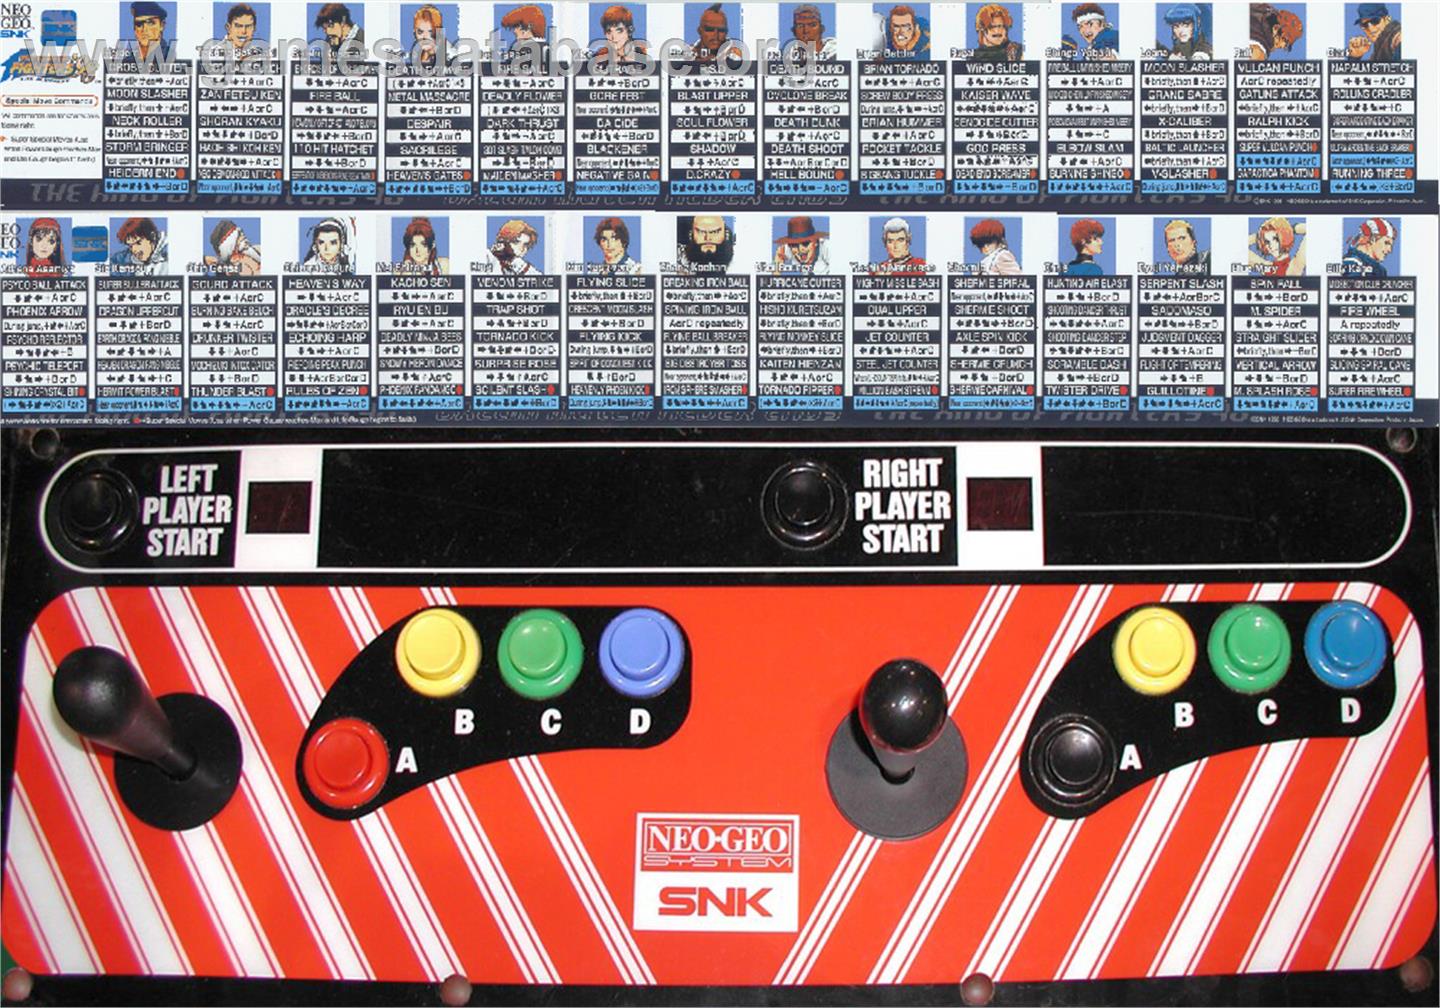 The King of Fighters '98 - The Slugfest / King of Fighters '98 - dream match never ends - Arcade - Artwork - Control Panel